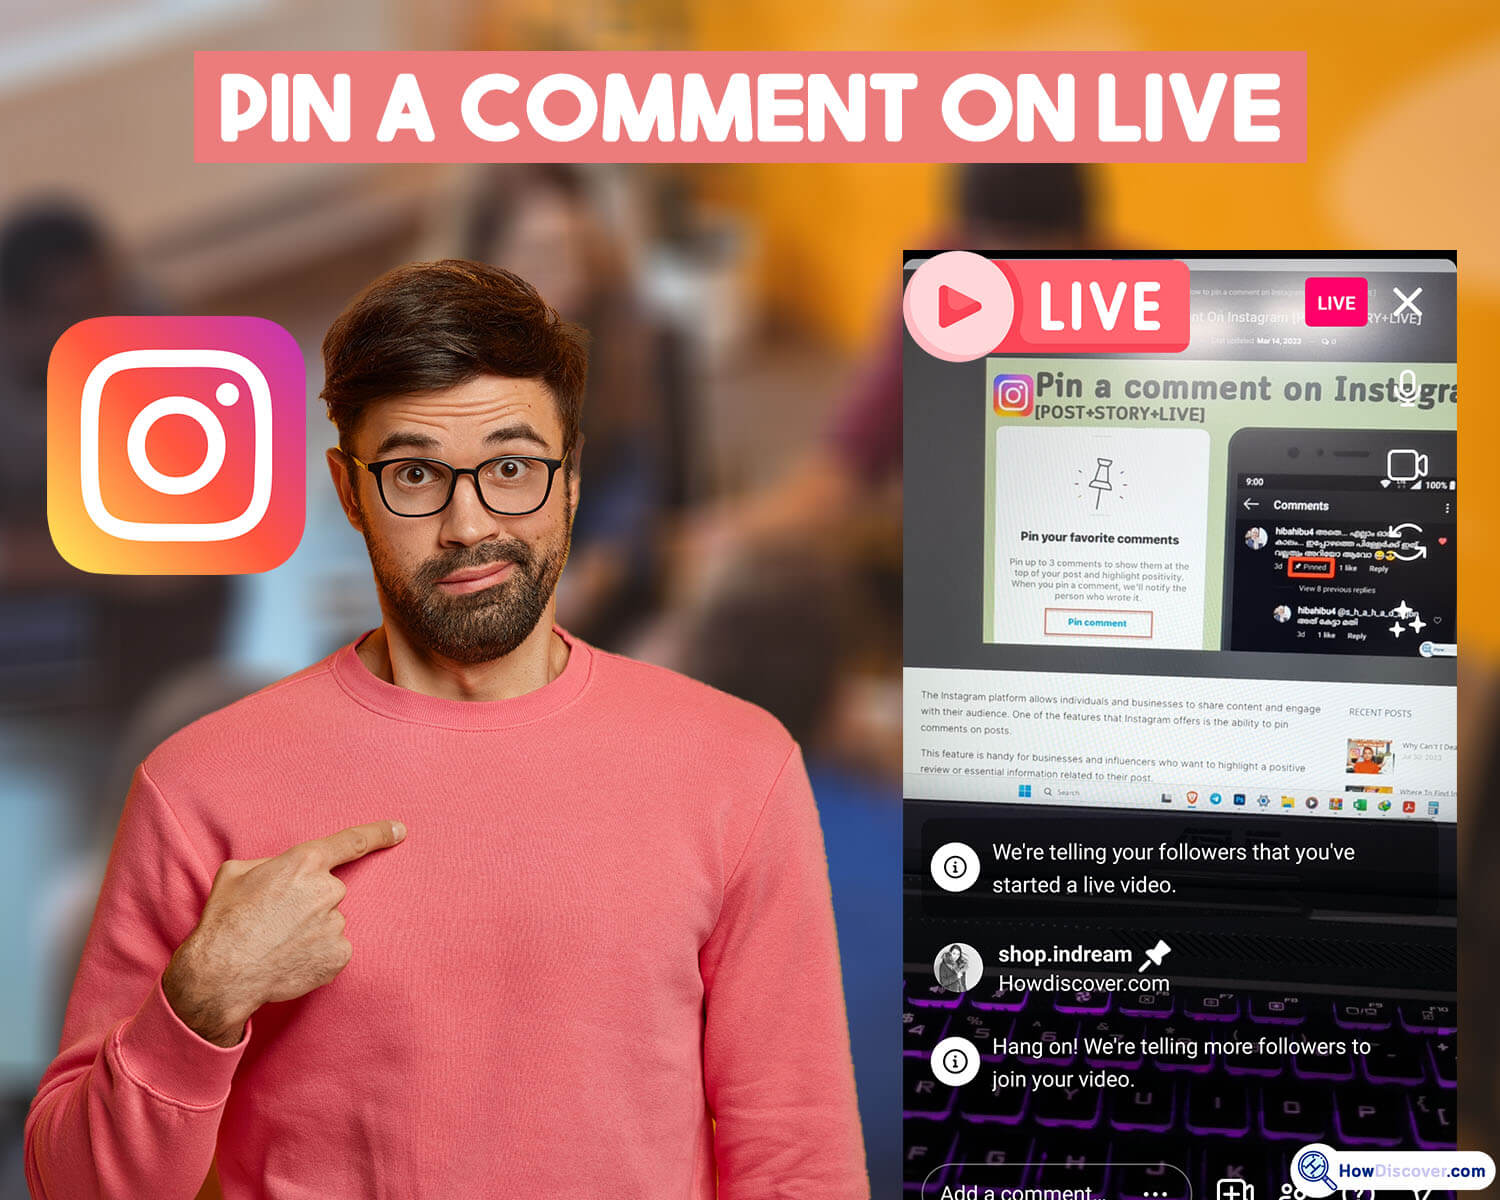 How To Pin A Comment On Instagram - How do you pin & unpinning a comment on an Instagram live